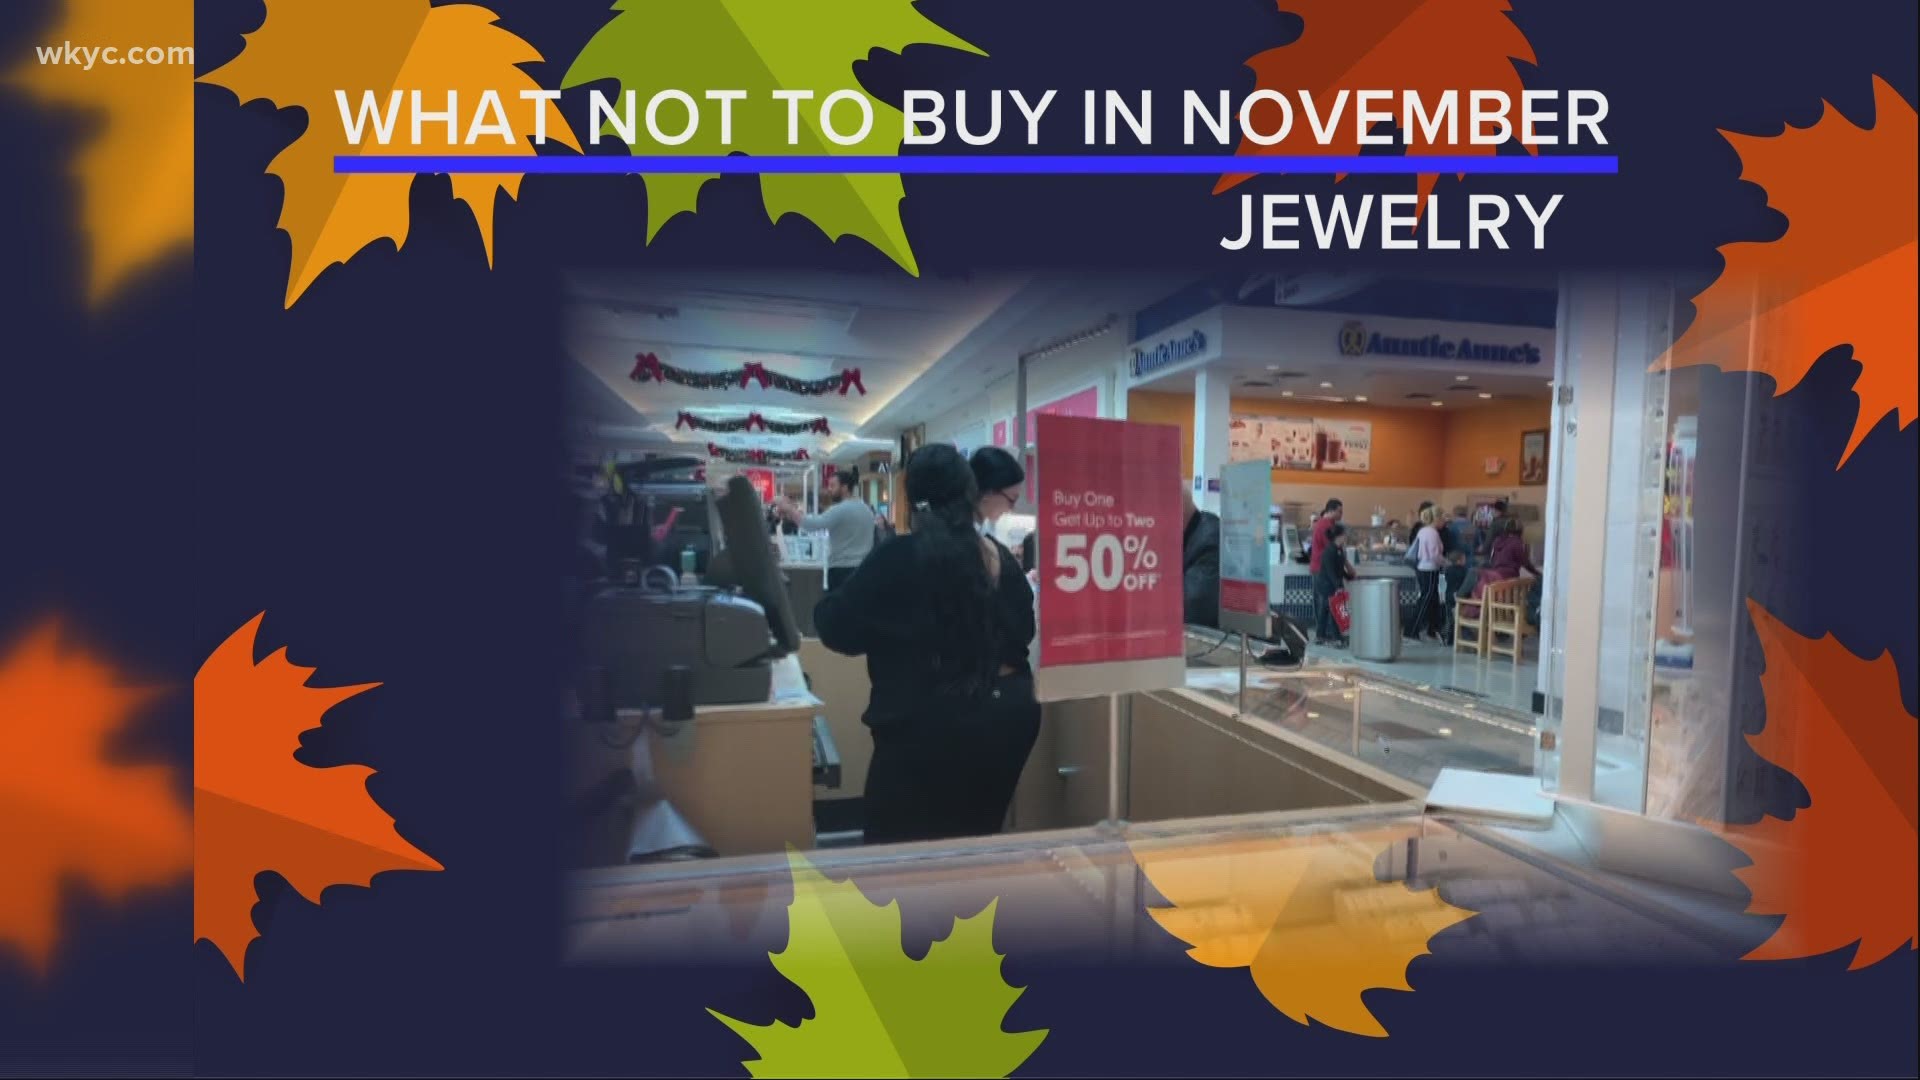 Normally people wait until Black Friday or Cyber Monday to shop. But with these deals, why wait?  3News' Danielle Serino has the scoop on shopping this month.